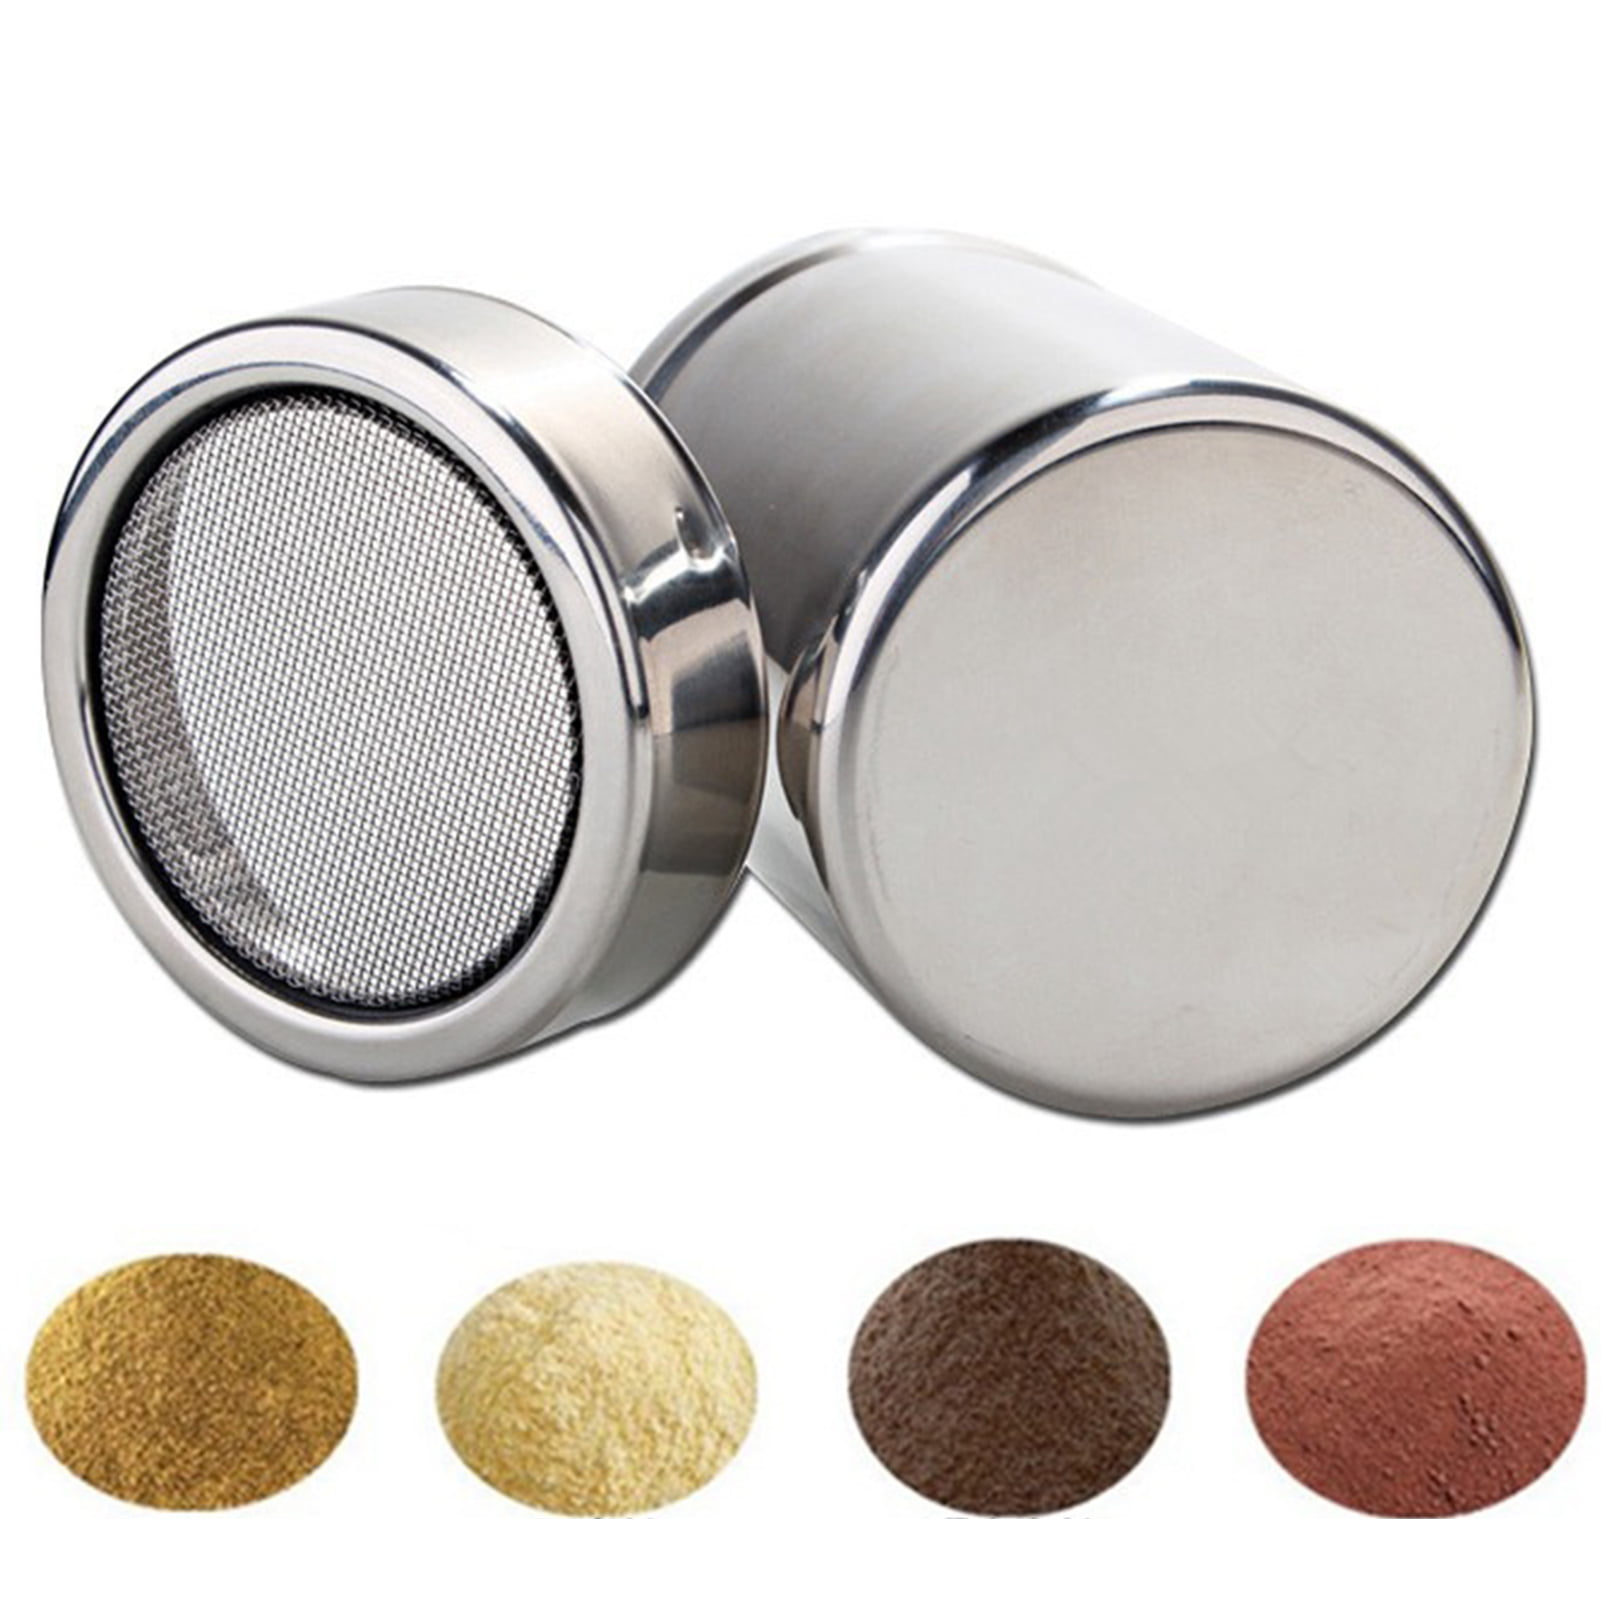 3 Pcs Coffee Cocoa Dredges with Fine-Mesh Lid Stainless Steel Mesh Shaker Powder Cans For Baking Cooking Home